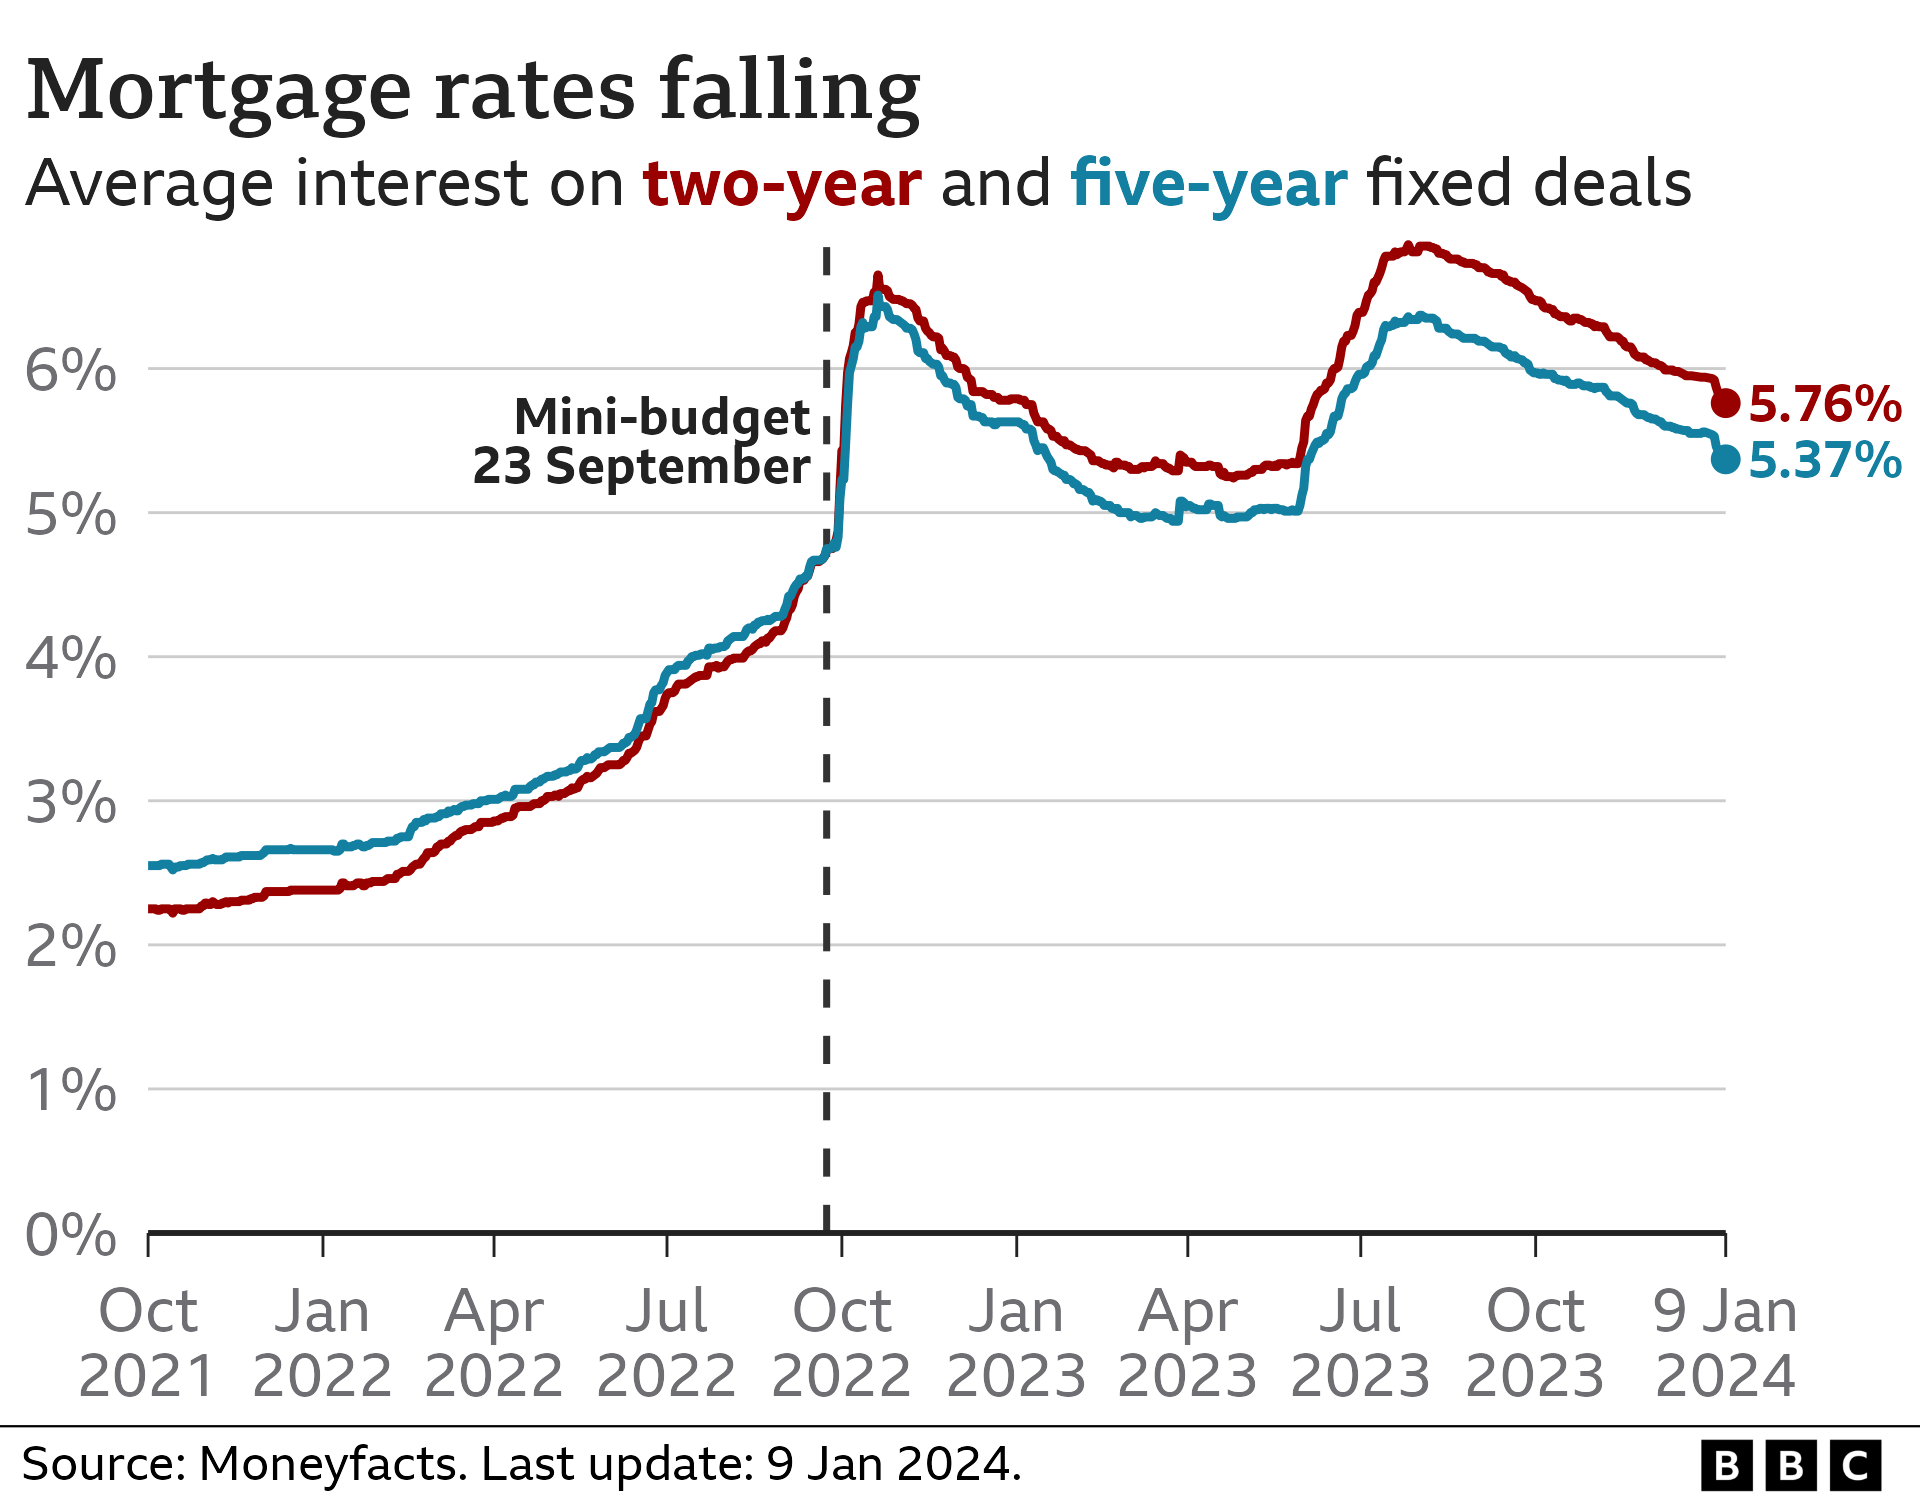 Line chart showing the average interest rate charged on two-year and five-year fixed deals. The two-year rate was 5.76% on 9 Jan 2024, and it peaked at 6.86% in July 2023. The five-year rate was 5.37%, and it peaked at 6.51% in October 2022.